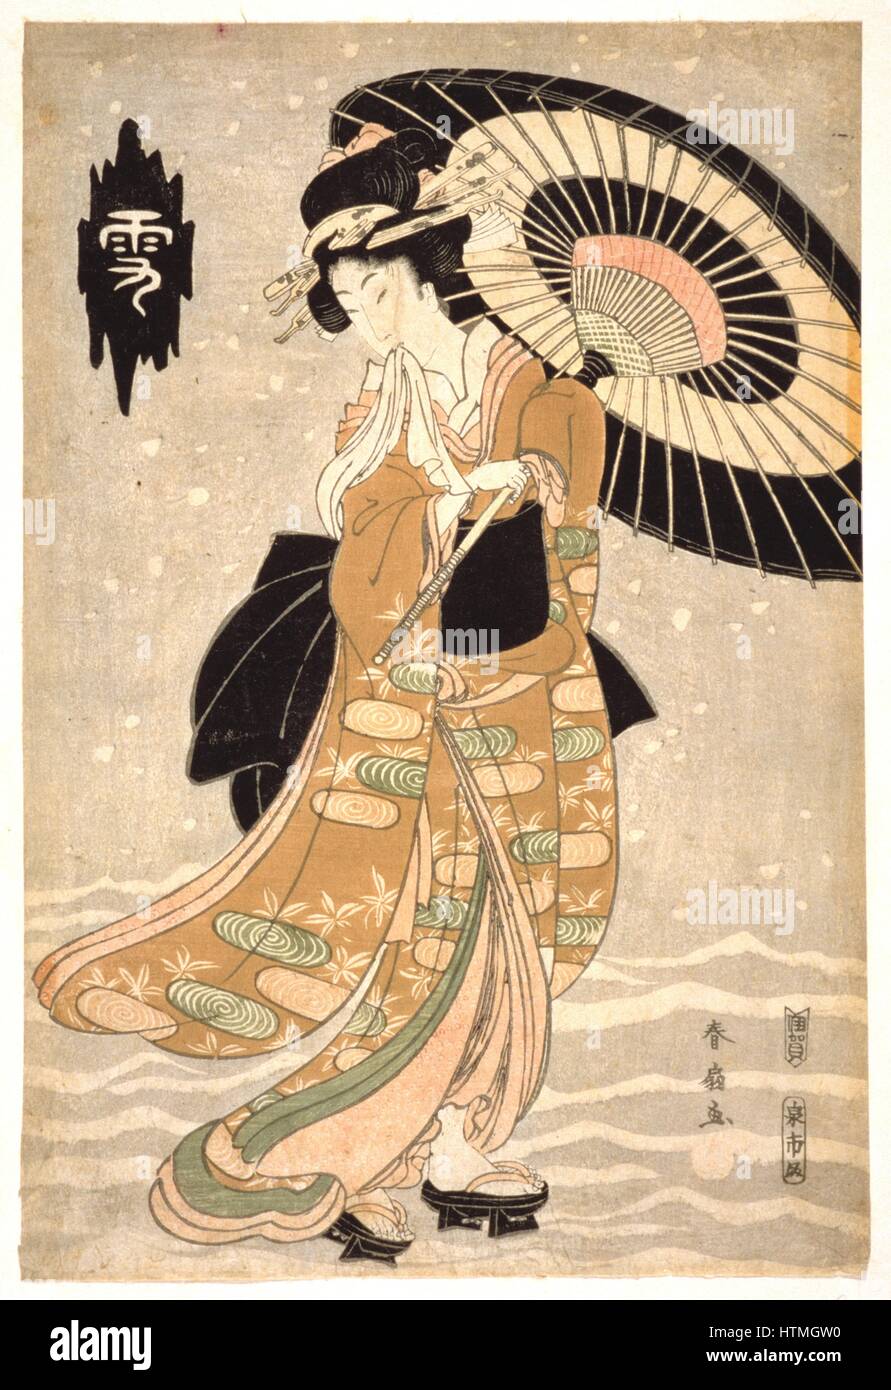 Young woman with parasol in falling snow. Coloured woodblock print from the series 'Snow, Moon and Flowers', c1812. Katsukawa Shunsen (c1762-1830). Stock Photo